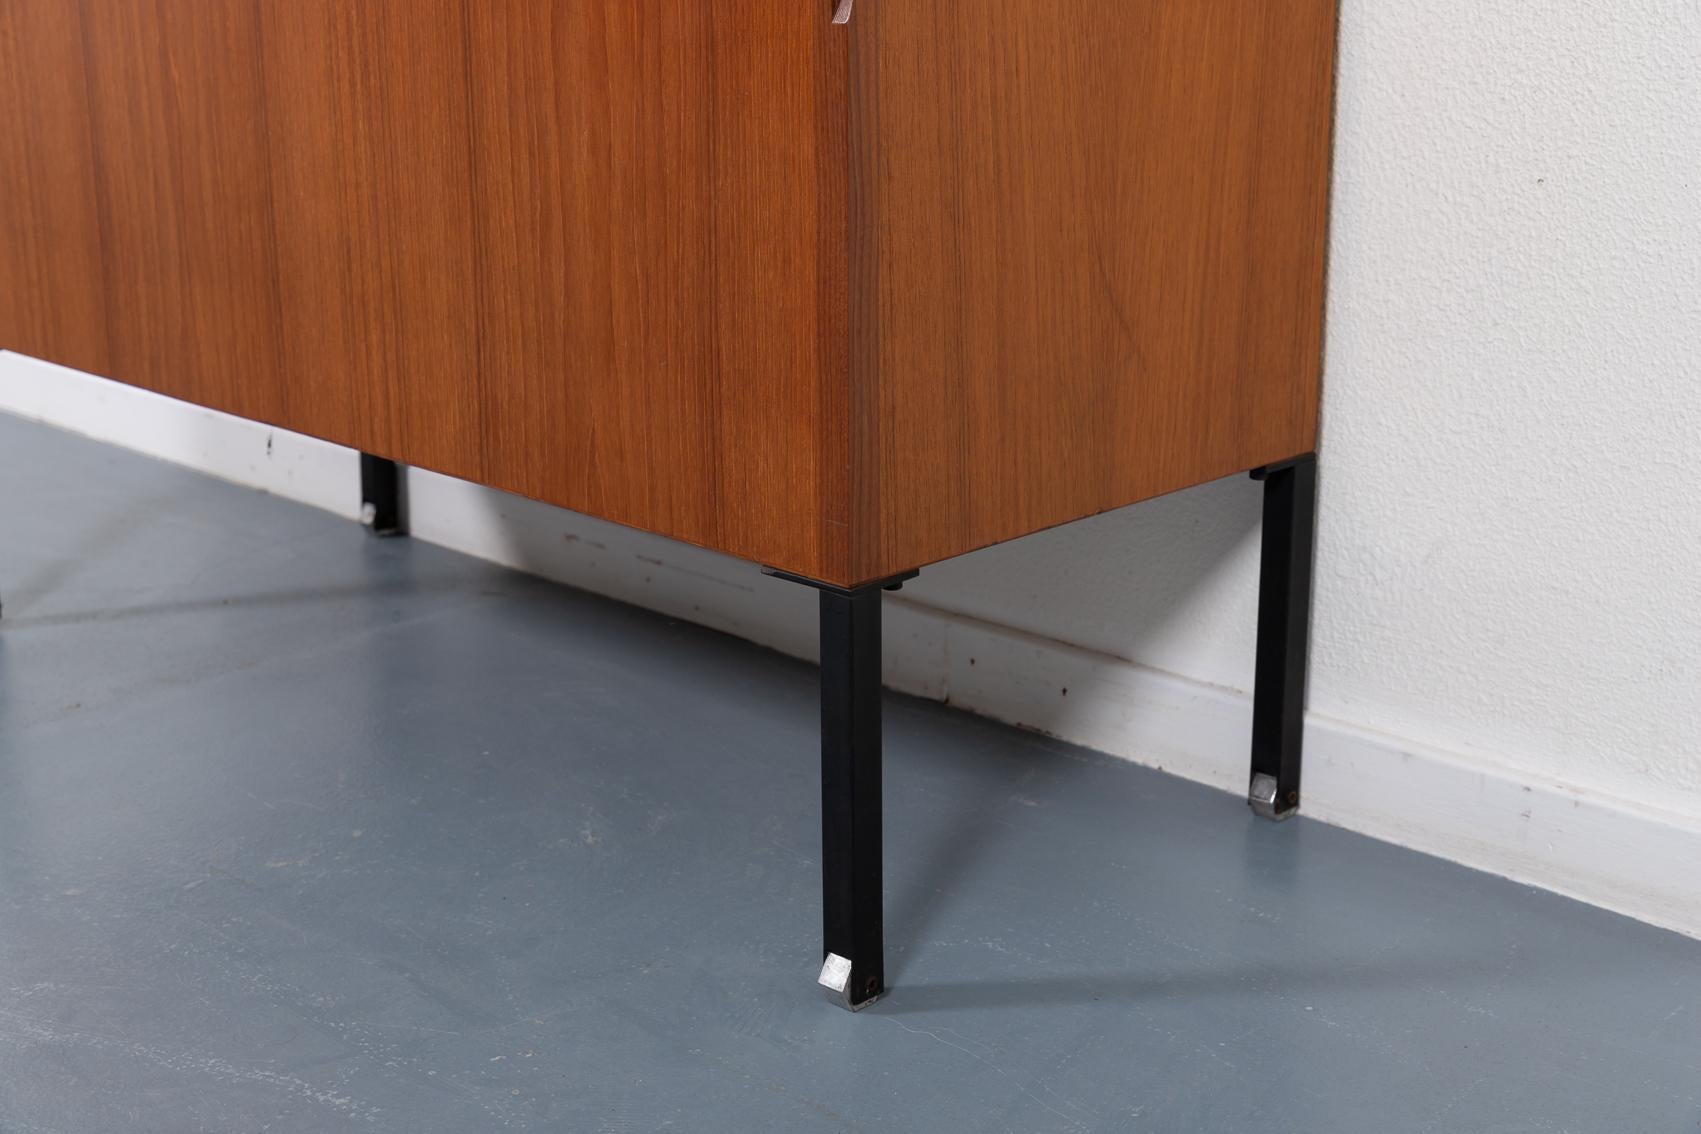 Velvet Italian Modern storage cabinet by Ico Parisi for MIM, 1960’s Italy For Sale